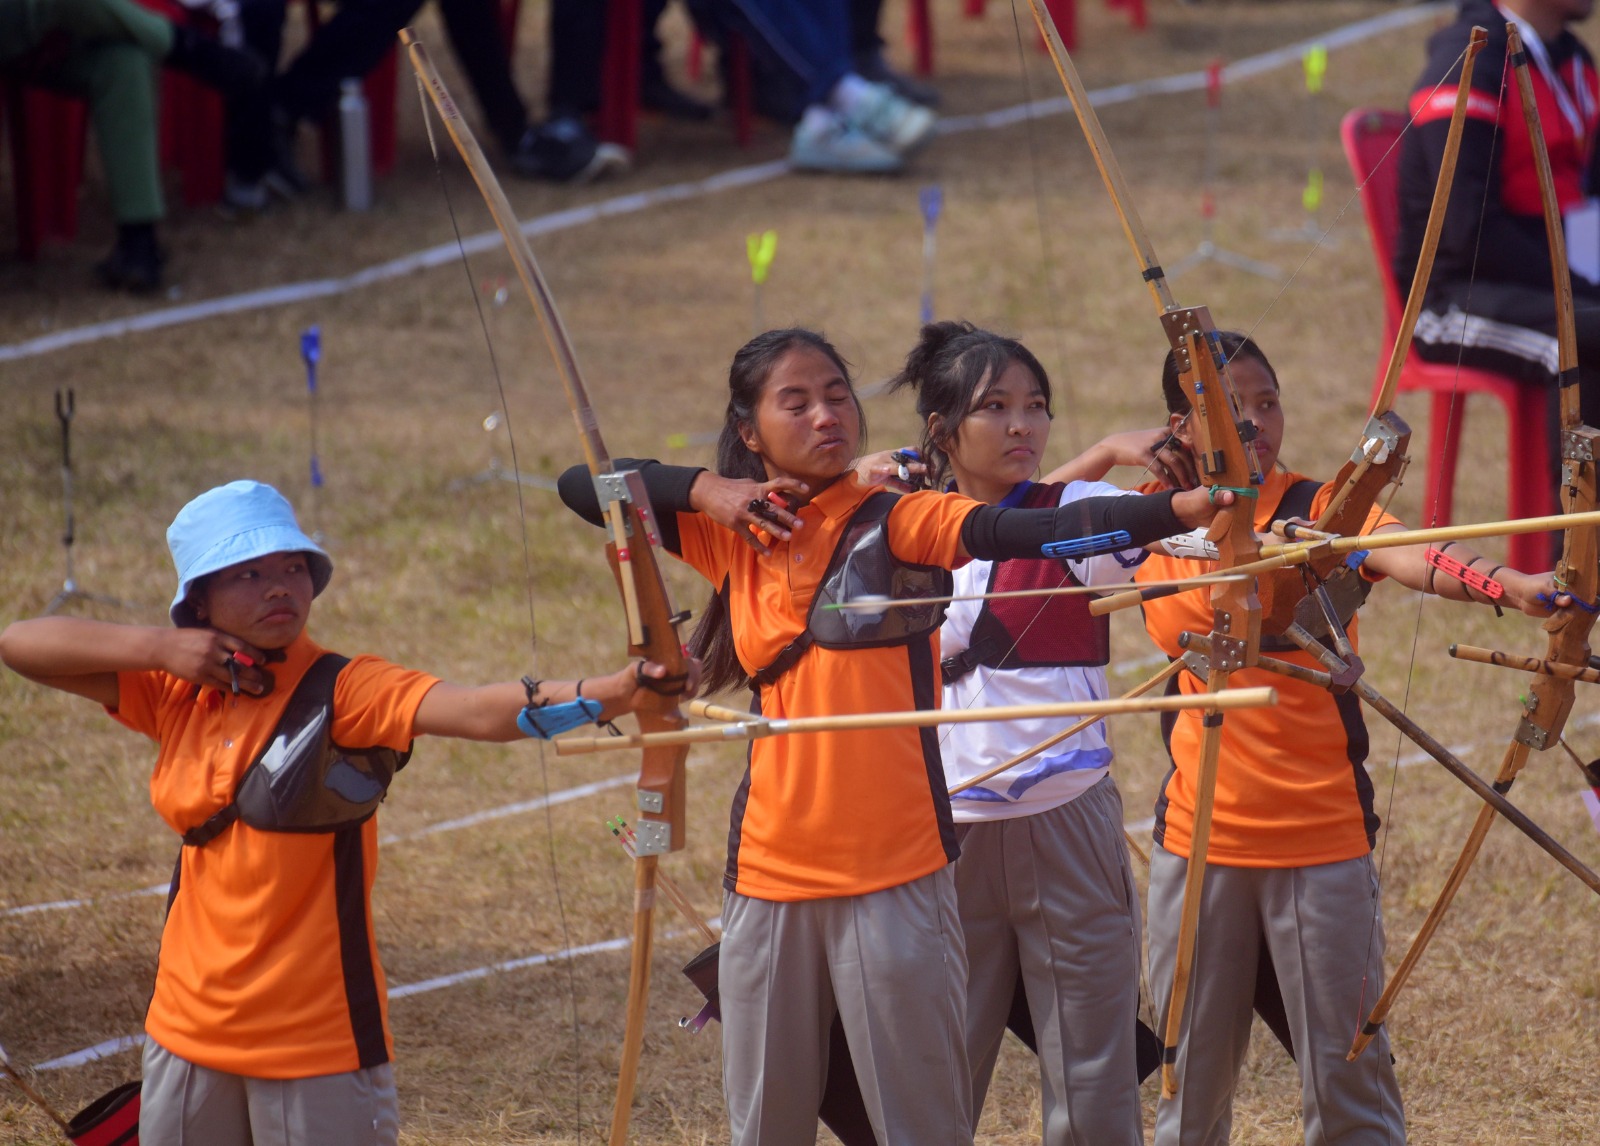 IN PICS |5th Meghalaya Games | Afternoon update | Visuals from Men & Women 4x100m relay race, Long Jump, Archery